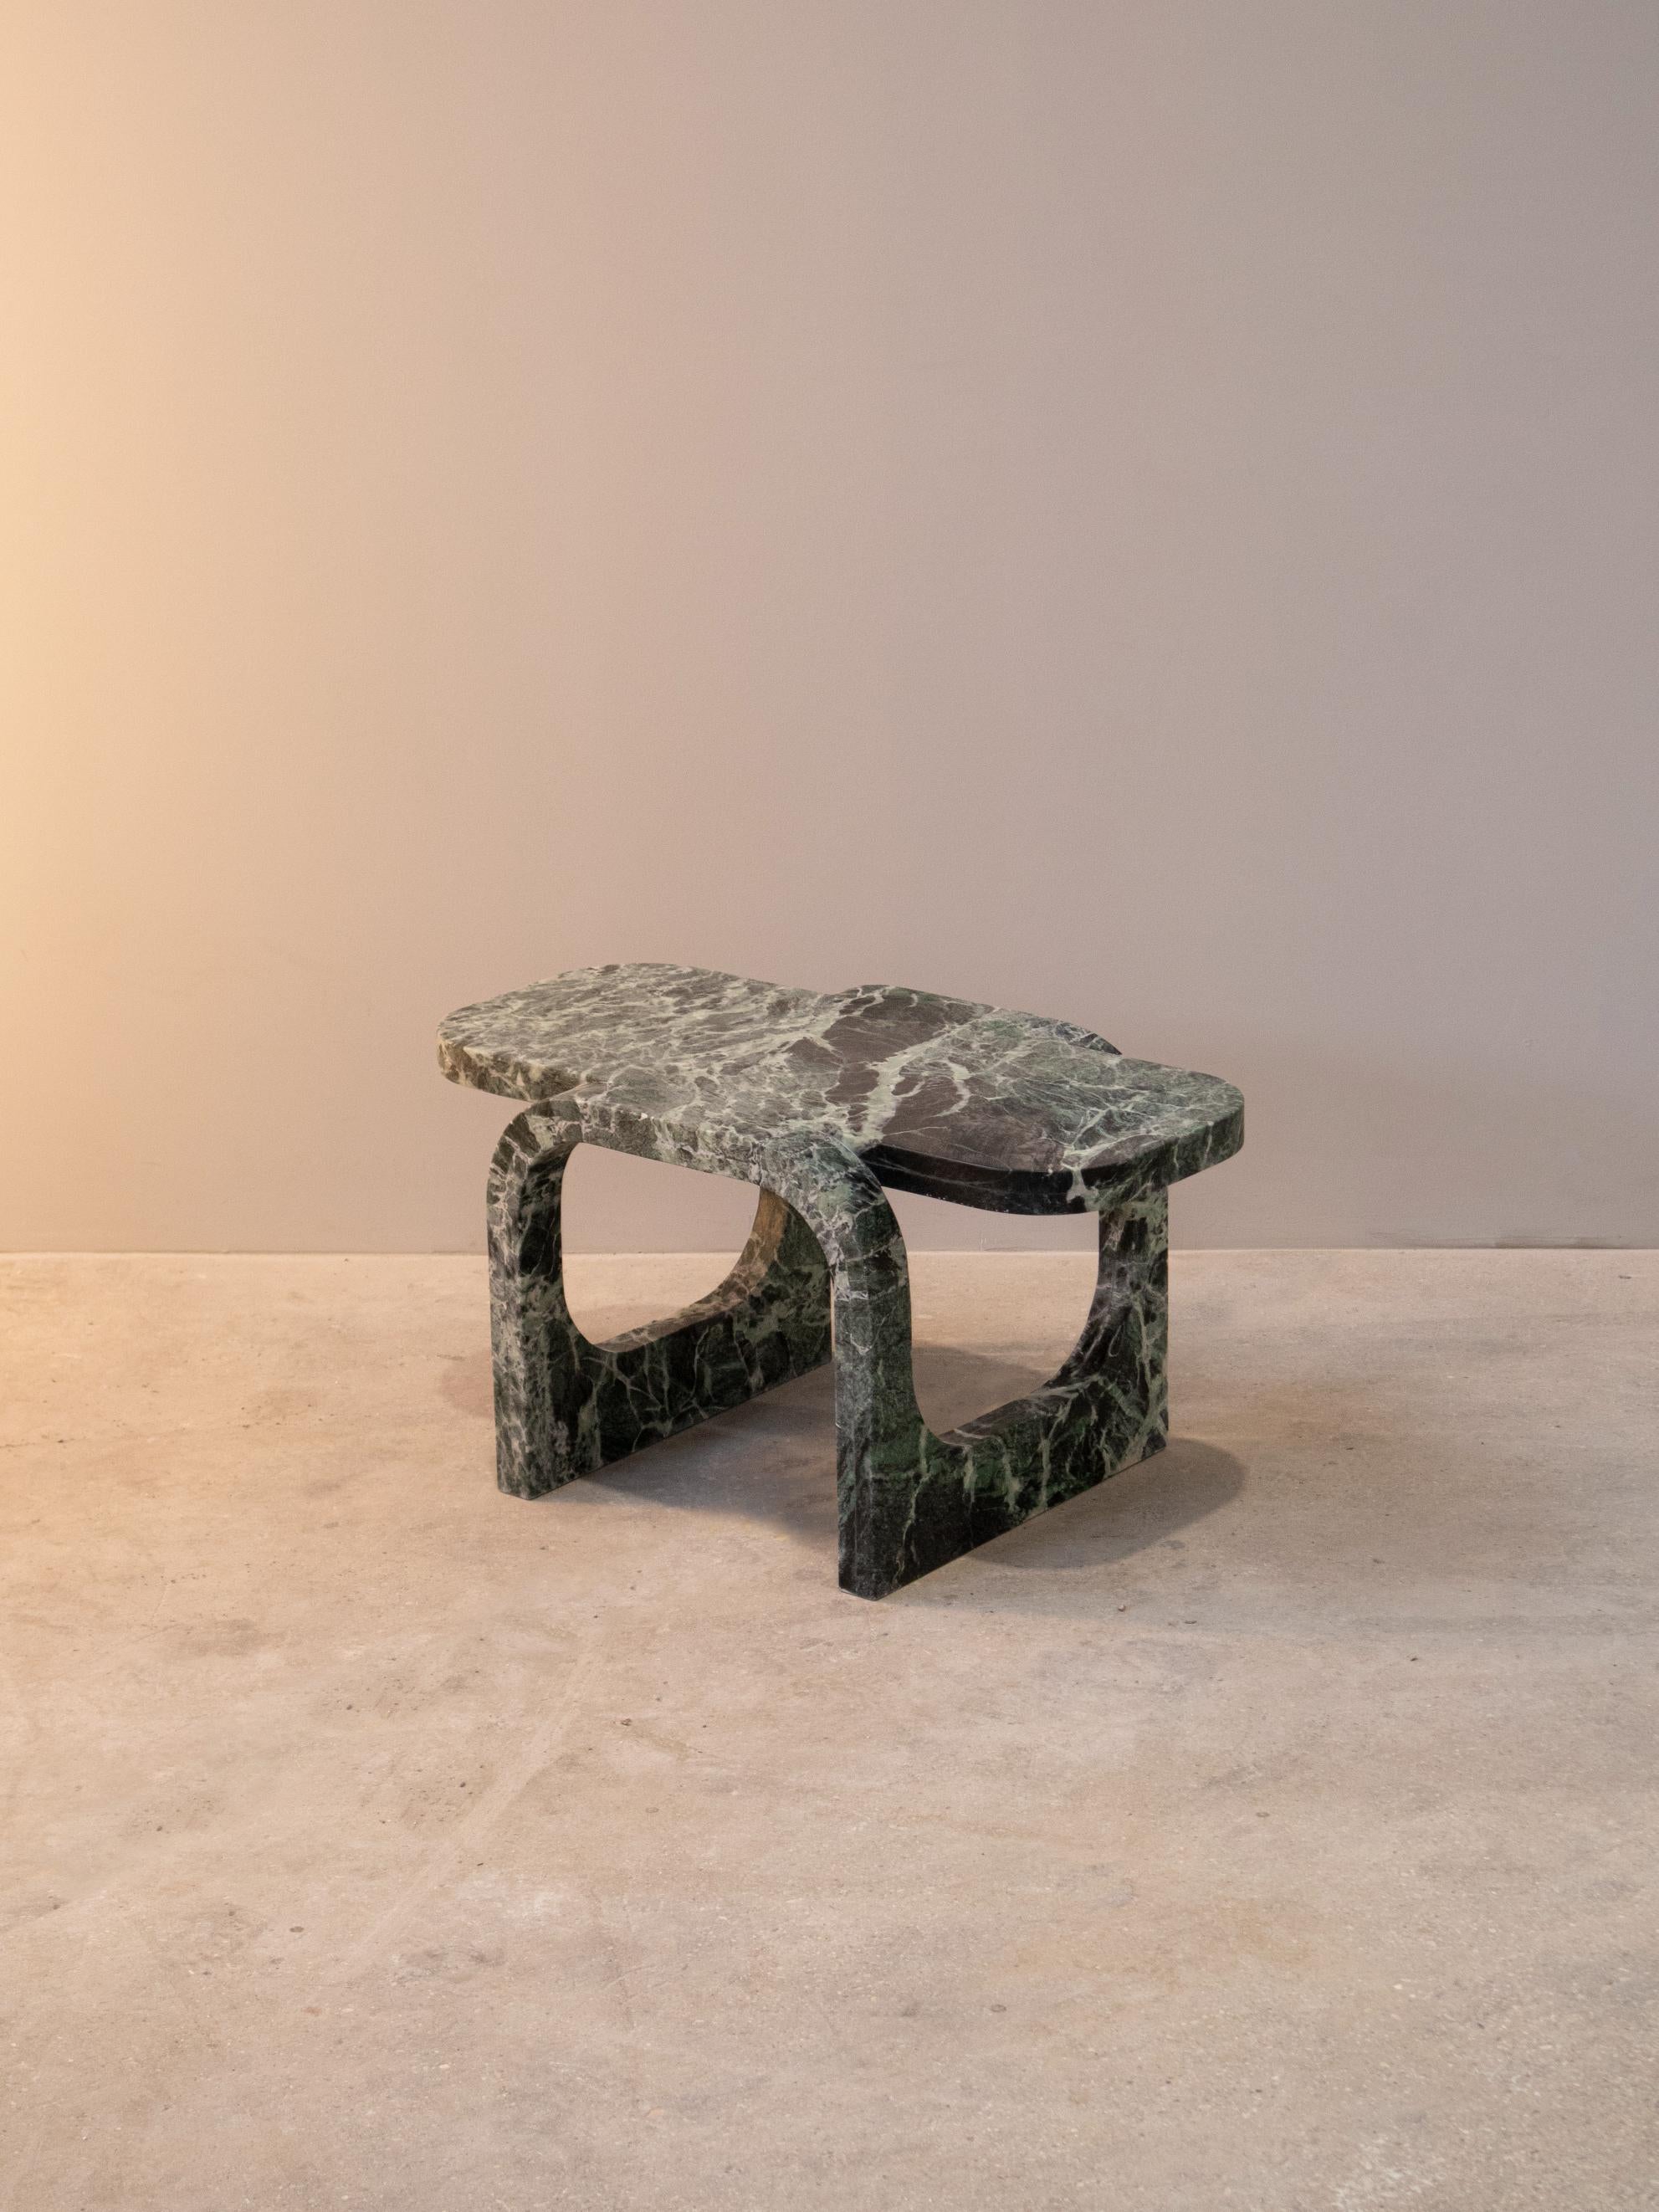 Verde Alpi cut and fold coffee table by dAM Atelier
Dimensions: W 78 x D 47 x H 40 cm
Materials: Verde Alpi marble.


dAM atelier is a duo of young Italian architects sharing the passion for design and architecture, Paolo d’Alessandro and Marco